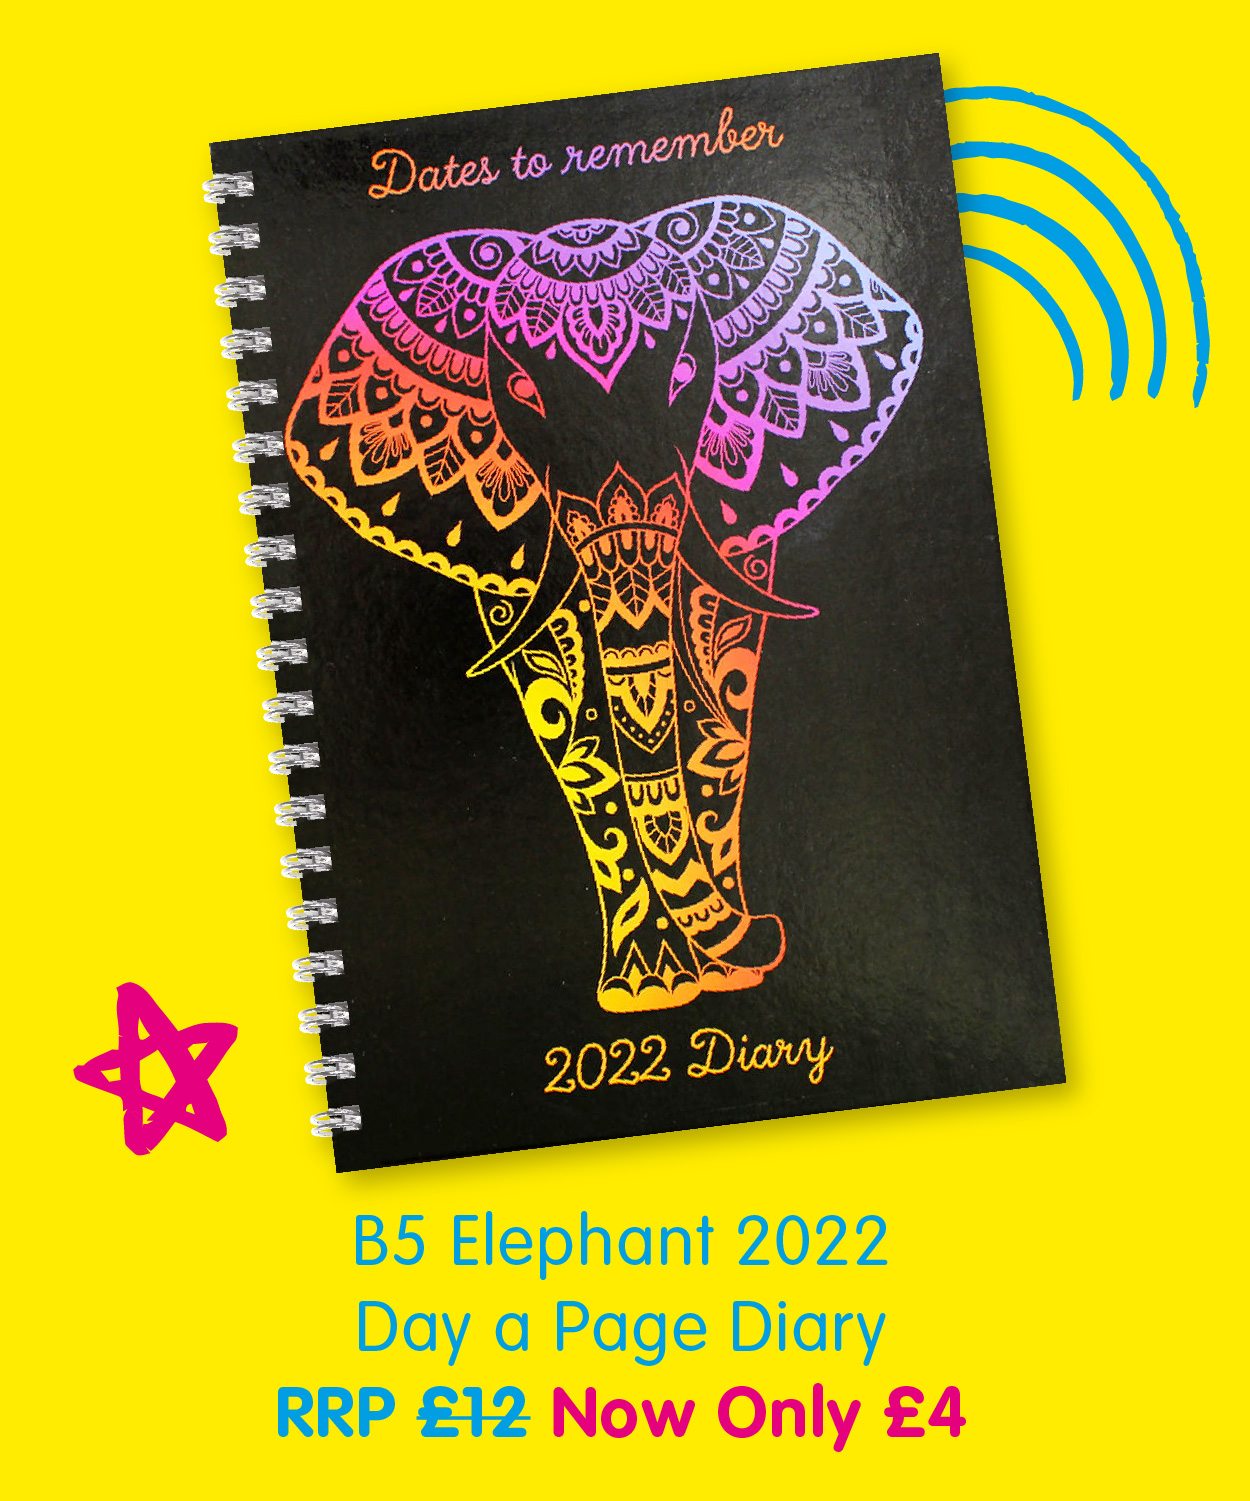 B5 Elephant 2022 Day a Page Diary